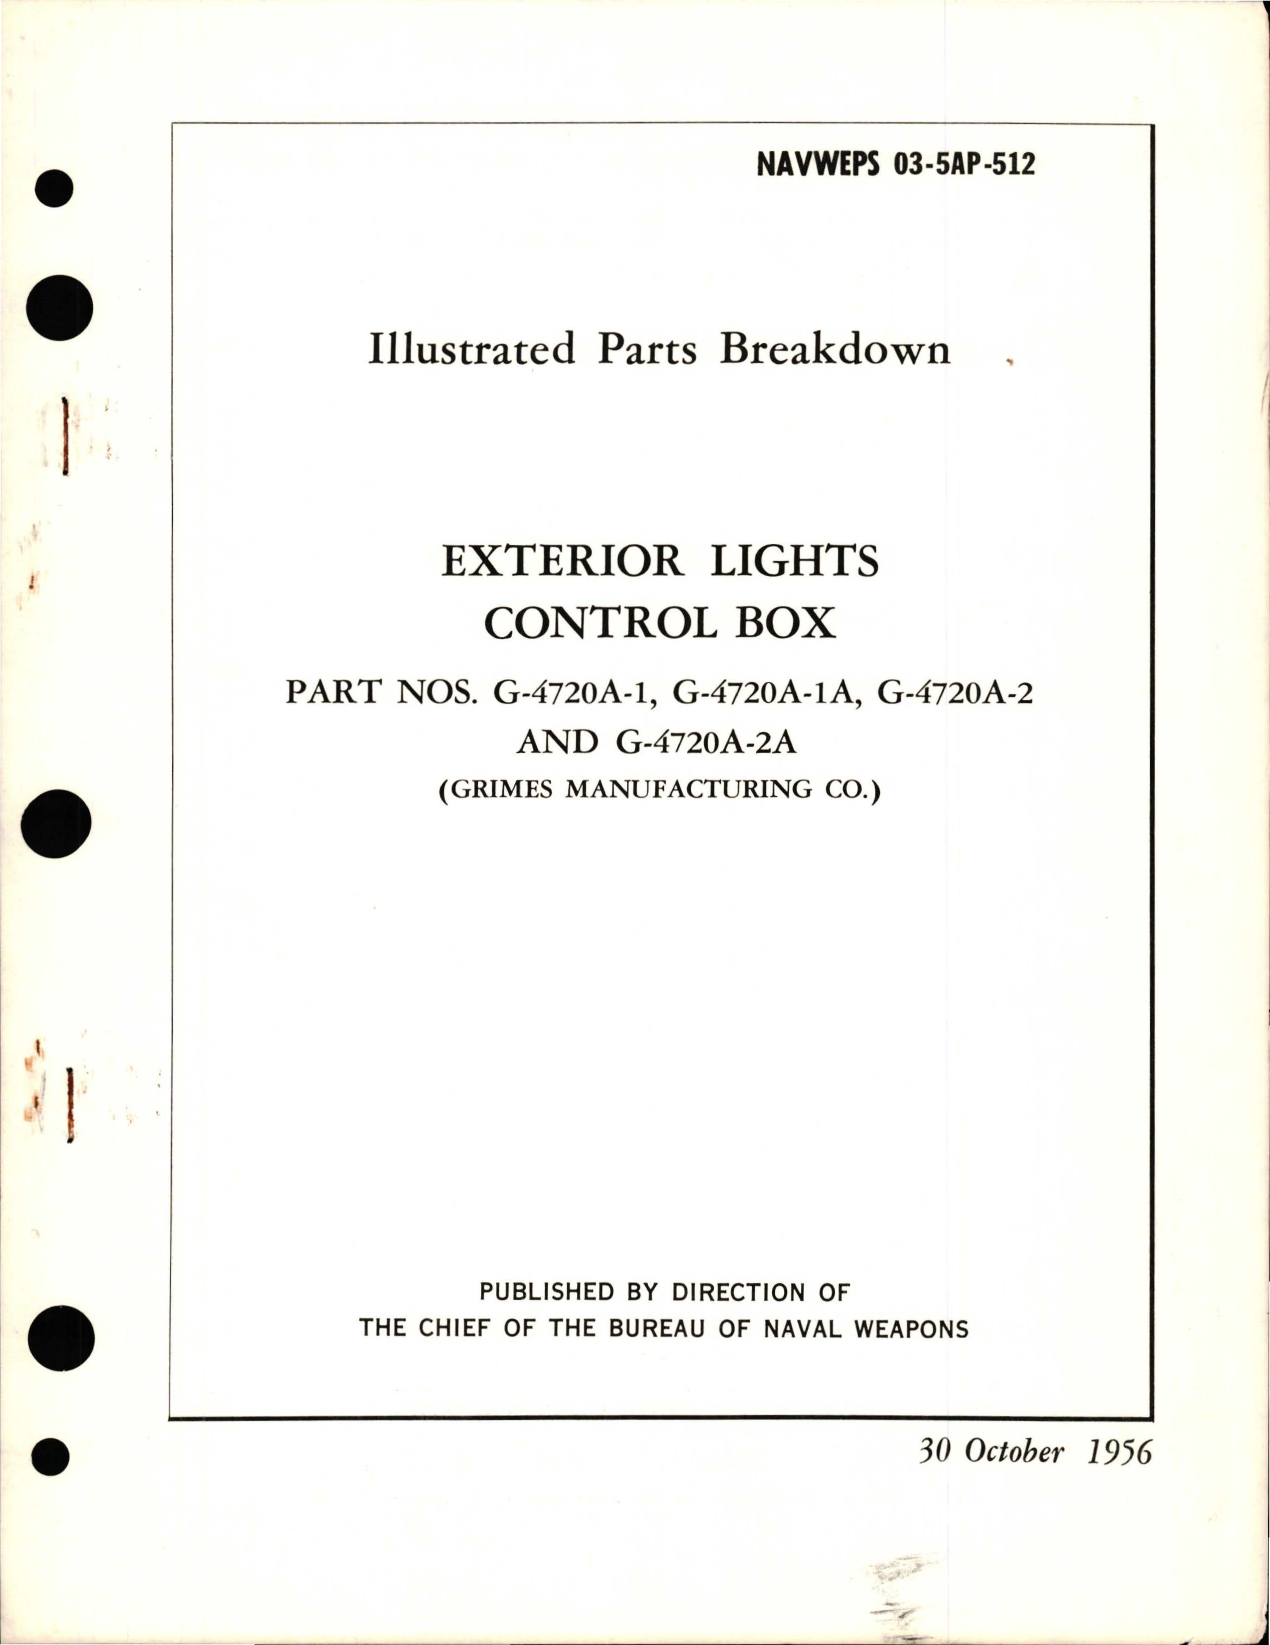 Sample page 1 from AirCorps Library document: Illustrated Parts Breakdown for Exterior Lights Control Box, Parts G-4720A-1, G-4720A-1A, G-4720A-2, and G-4720A-2A